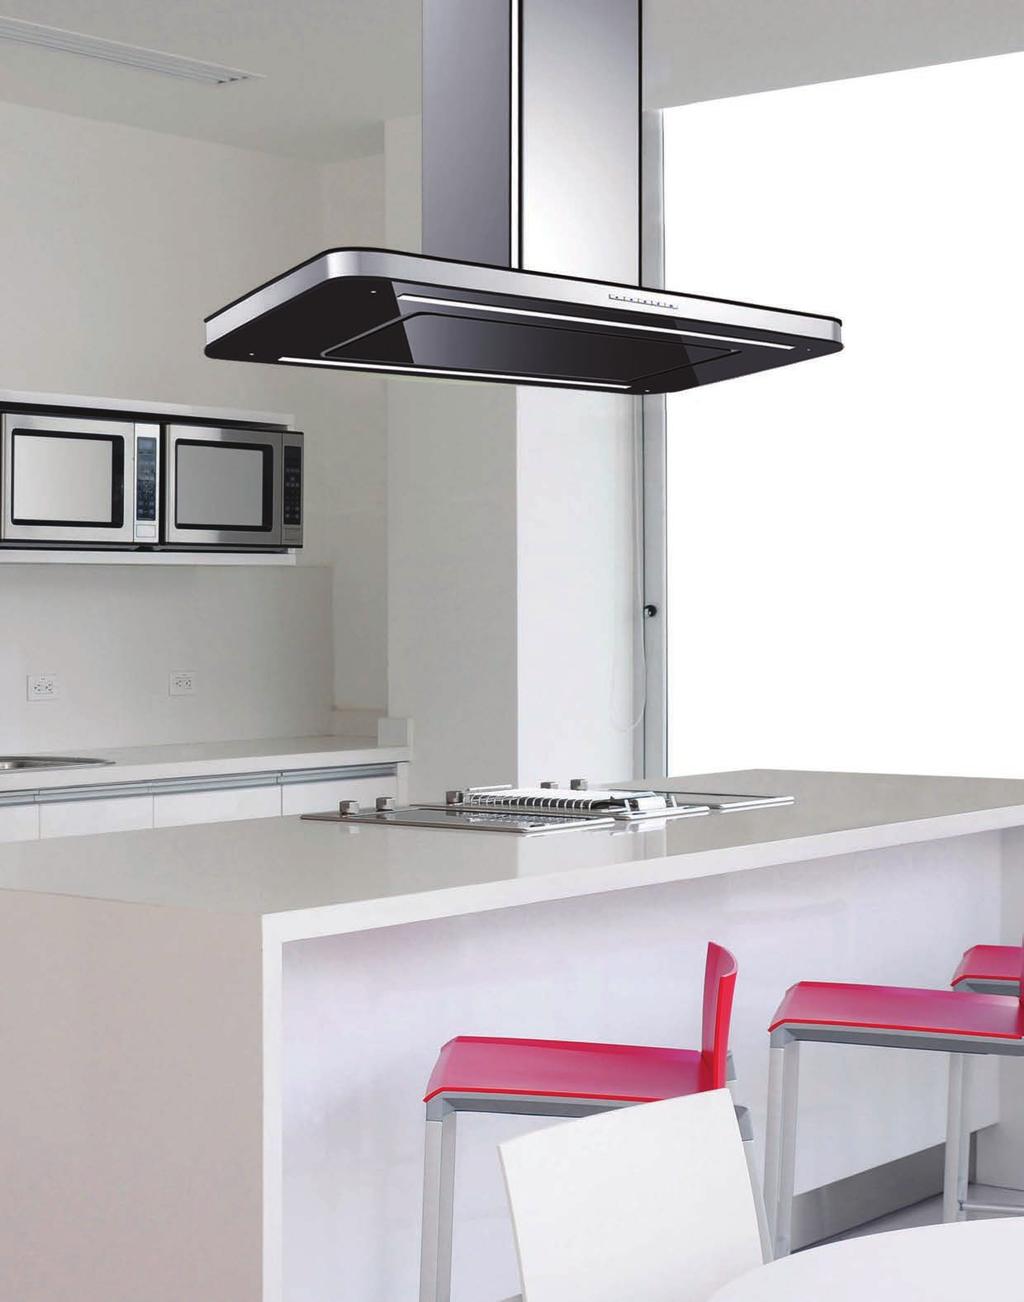 ISLAND HOODS LA-COSMIC Stainless Steel/Black Glass or White Glass Superbly Built Introducing the